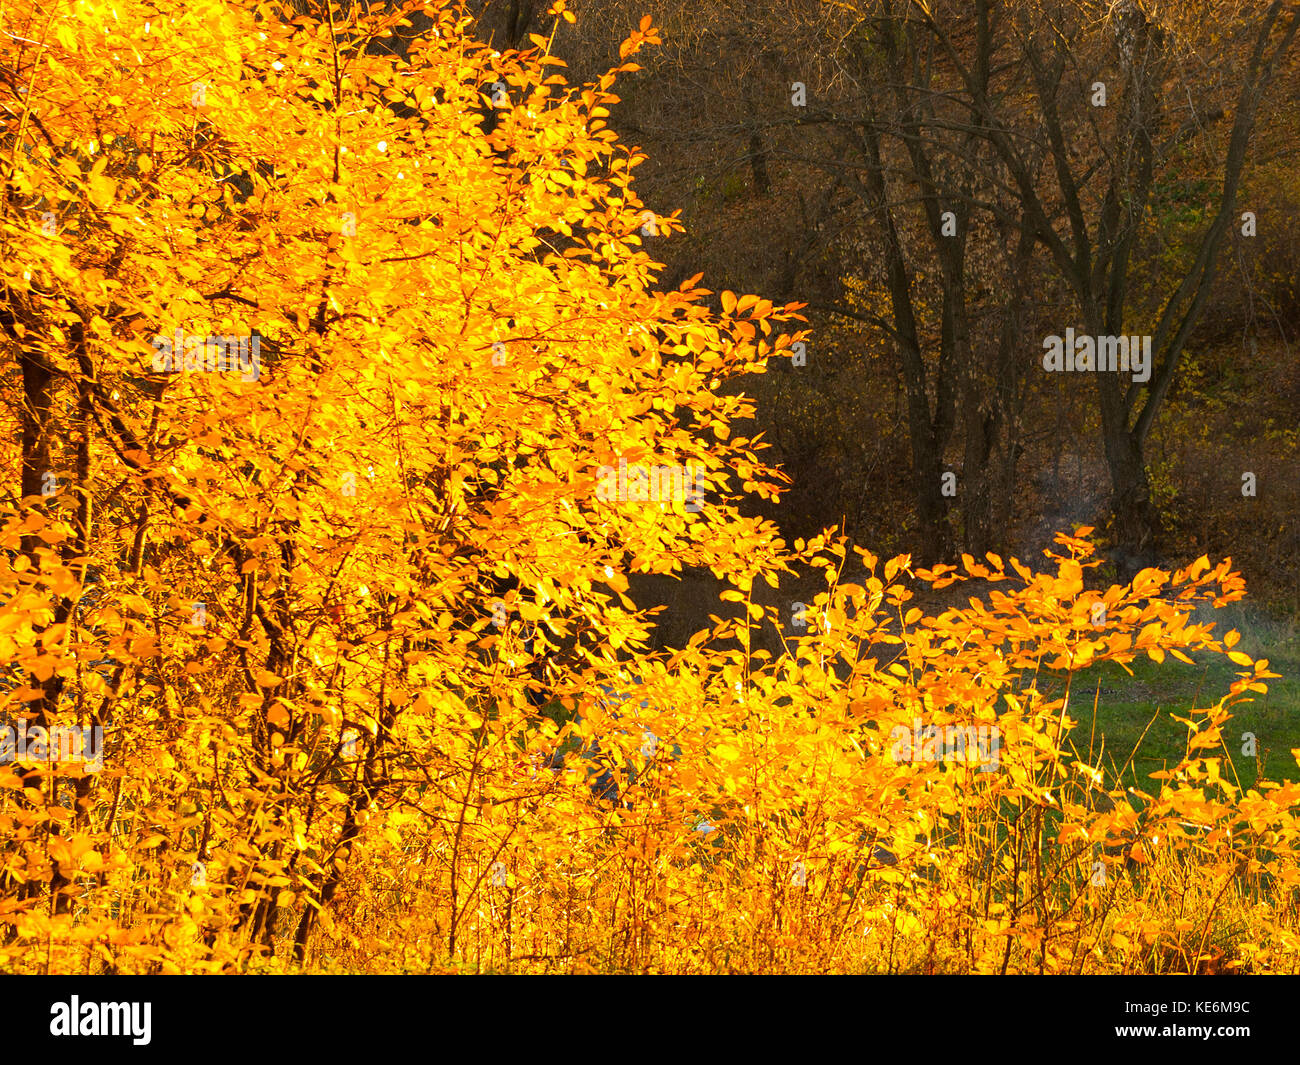 Trees in a park by an autumn day with yellow and red leaves and grass around covered by foliage. Stock Photo